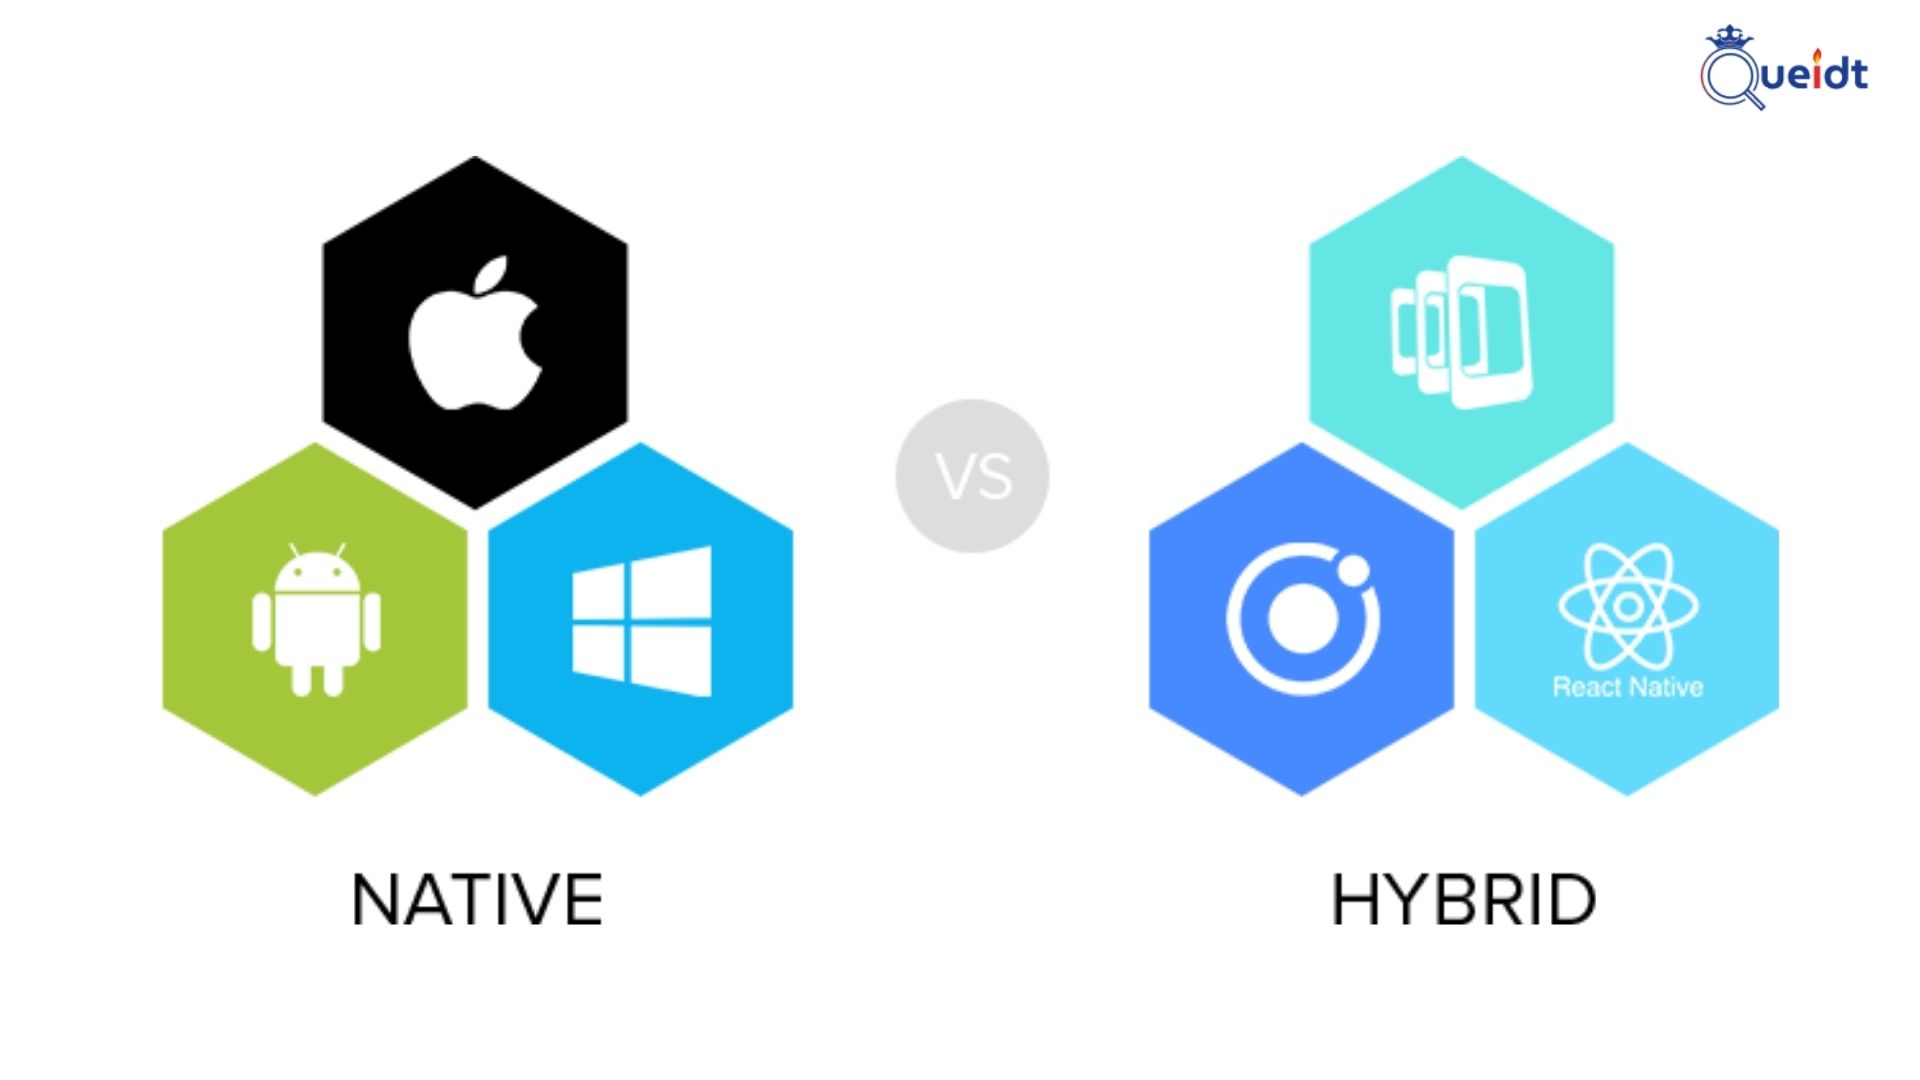 Native Mobile Apps - Are They Really Better Than Hybrid Apps?